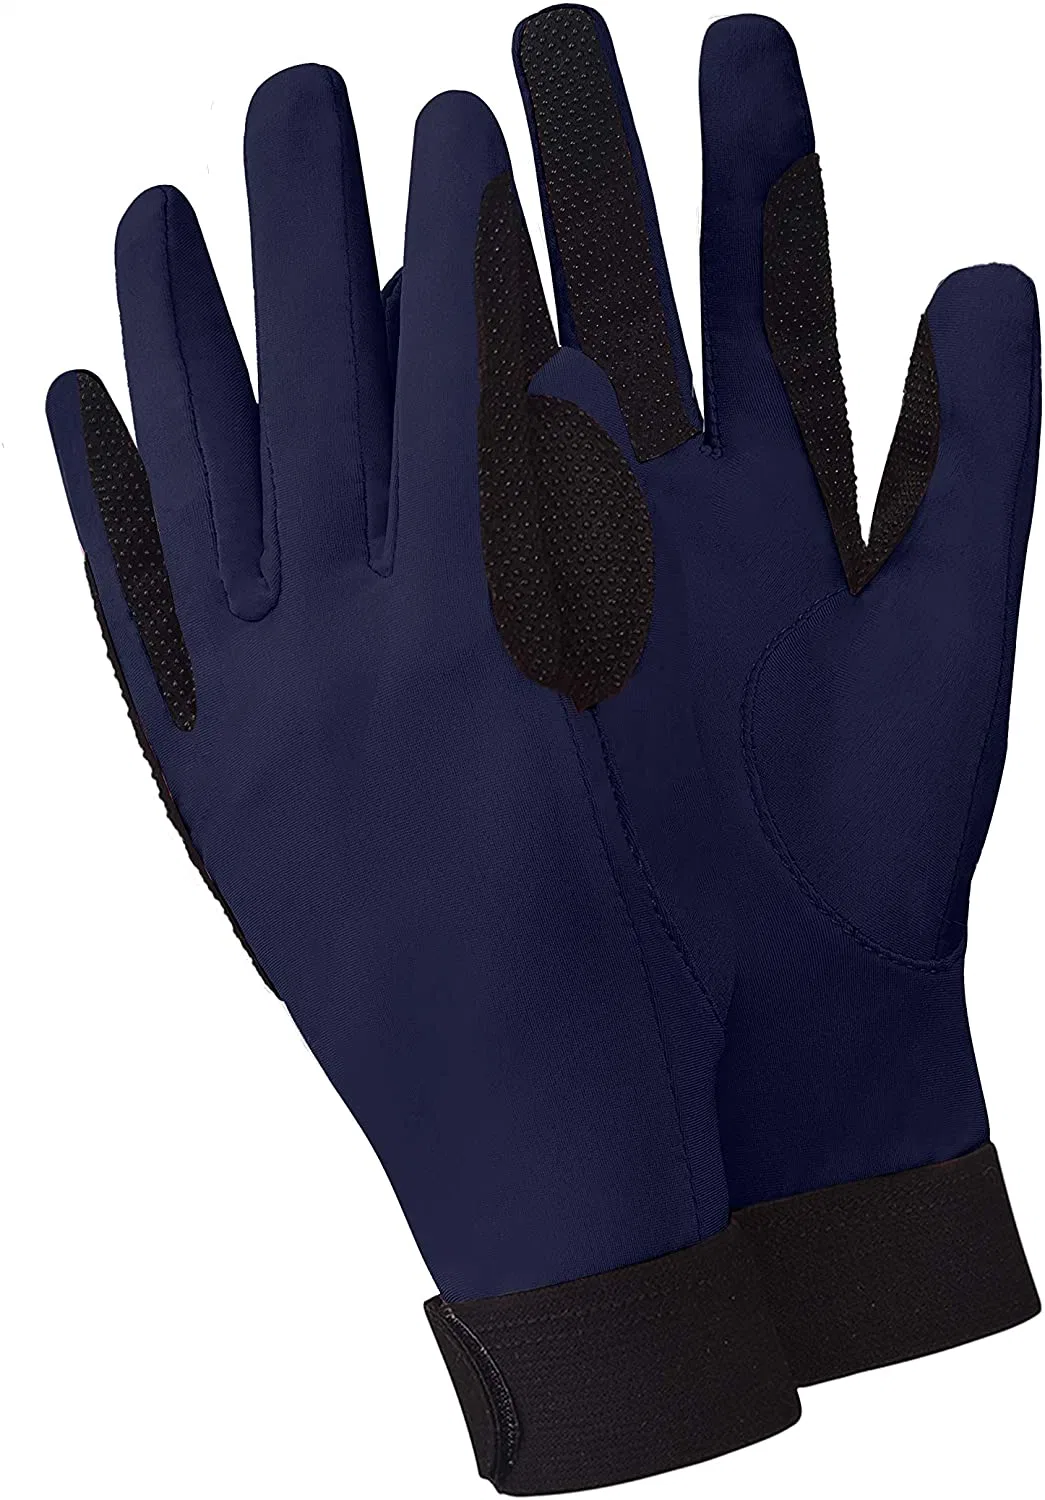 Tretchable Equestrian Gloves Breathable for Outdoor Horseback